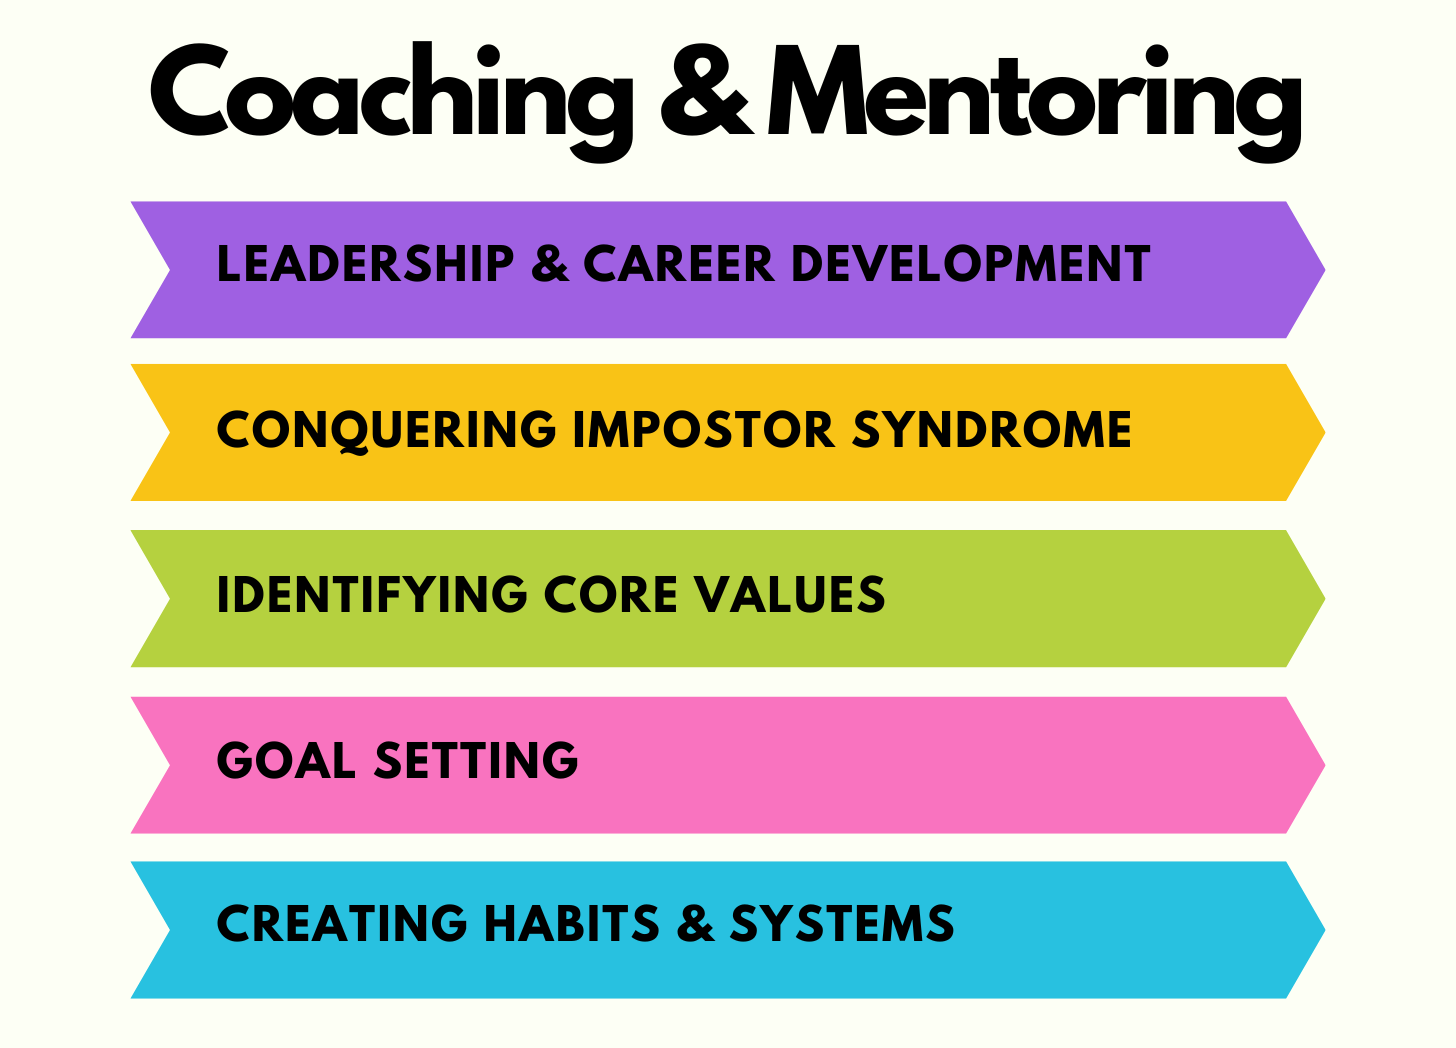 Coaching/mentoring: ◦Leadership & Career Development ◦Conquering Impostor Syndrome ◦Identifying Core Values ◦Goal Setting ◦Creating Habits & Systems